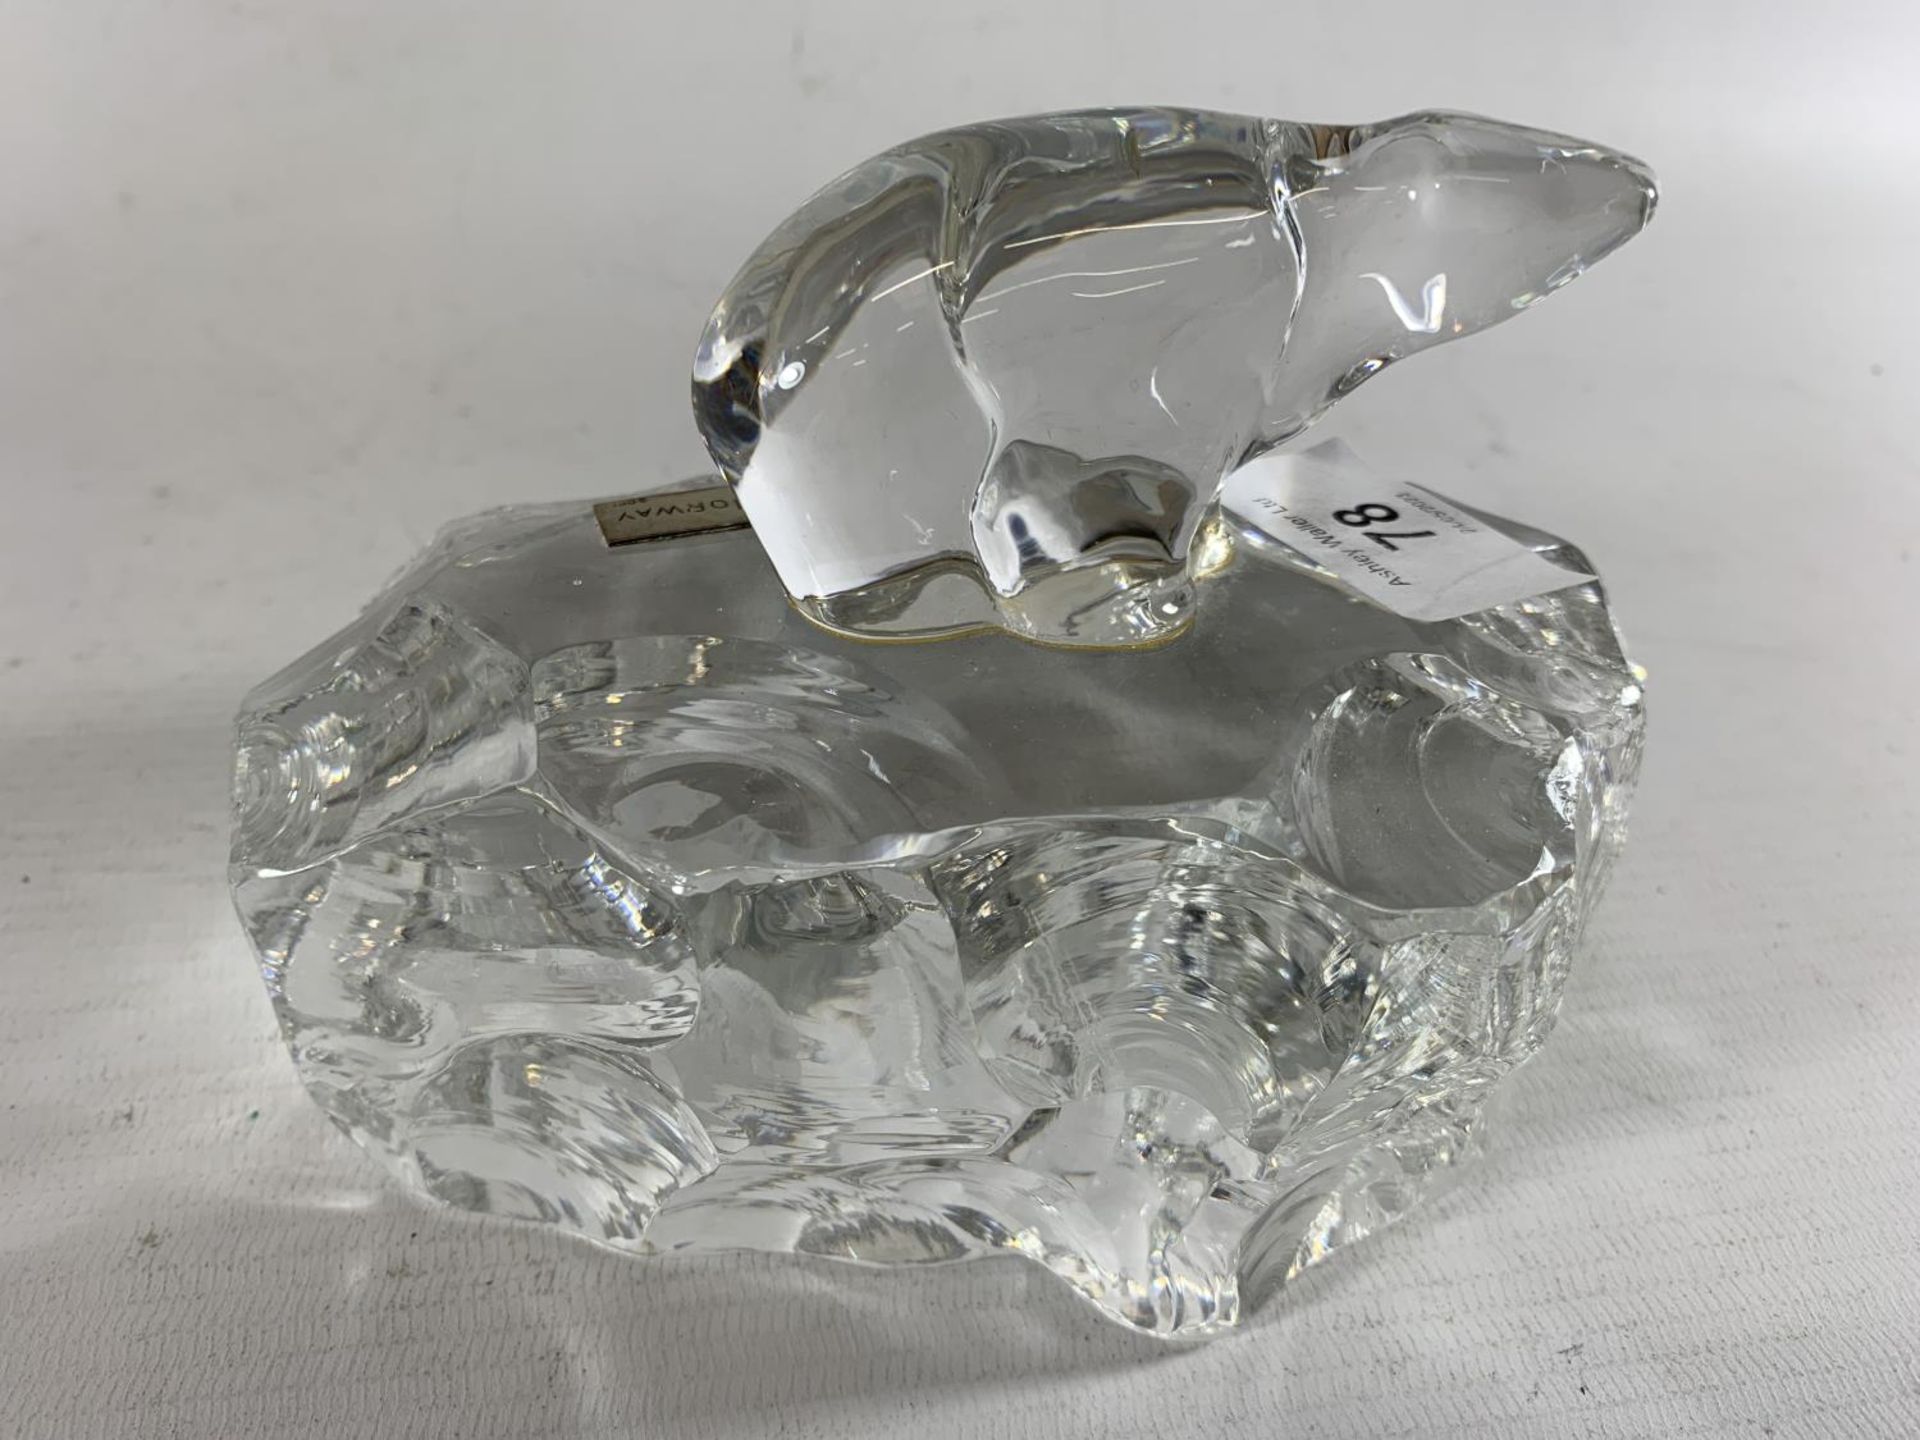 * A GLASS SCULPTURE OF A POLAR BEAR ON ICE, PRESENTED BY BERGEN POLICE NORWAY, 1977 - Image 3 of 3